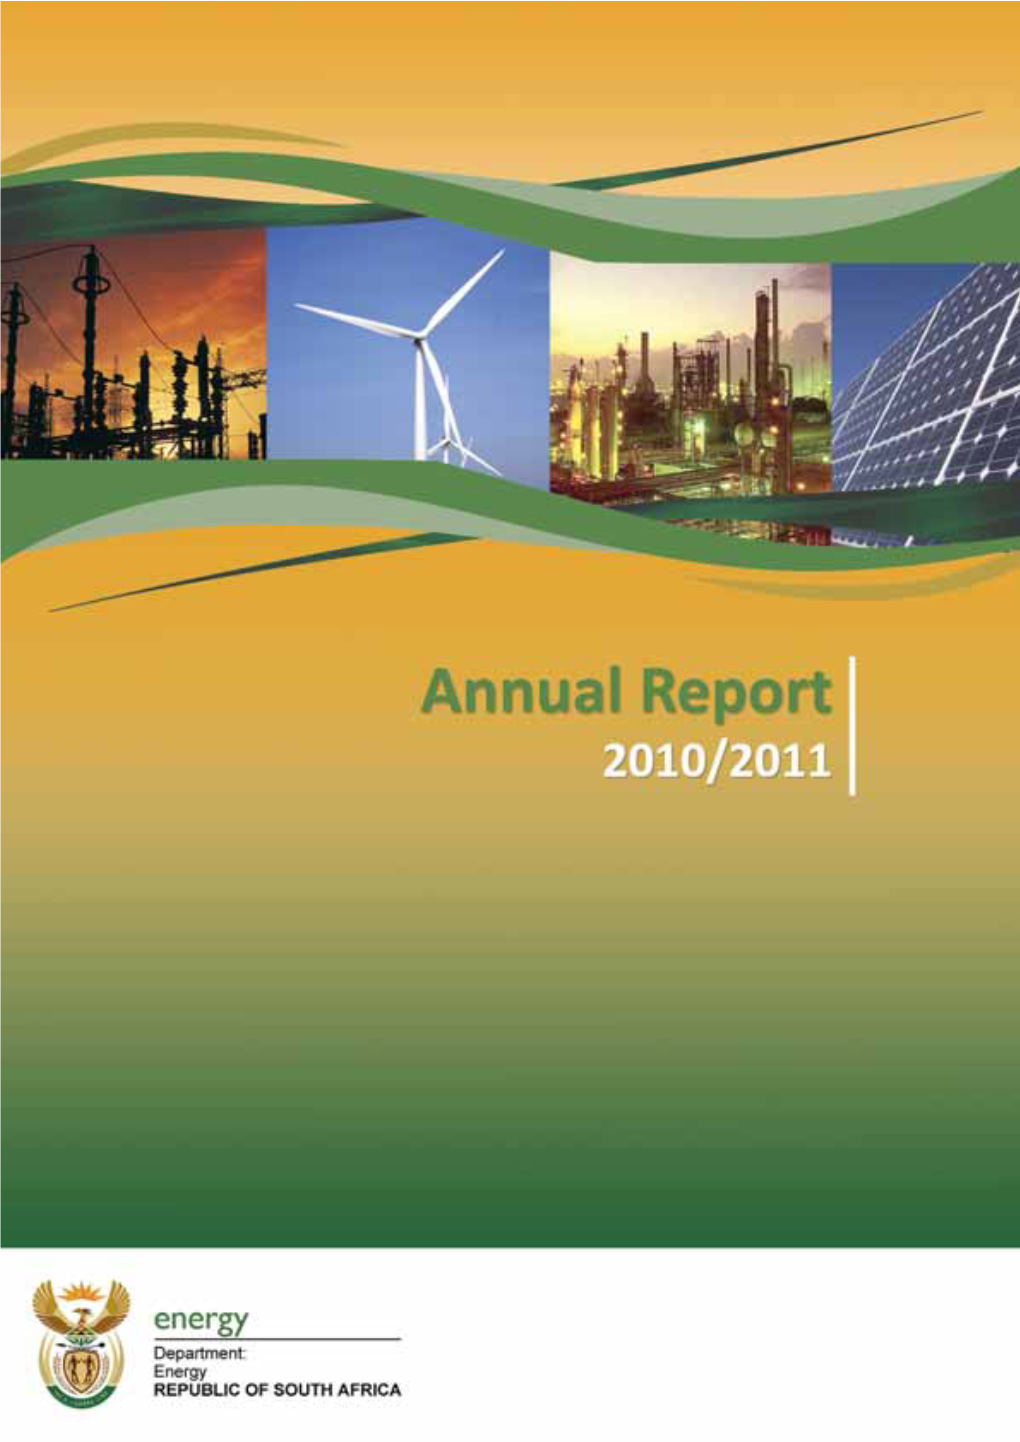 Department of Energy Annual Report 2010/2011